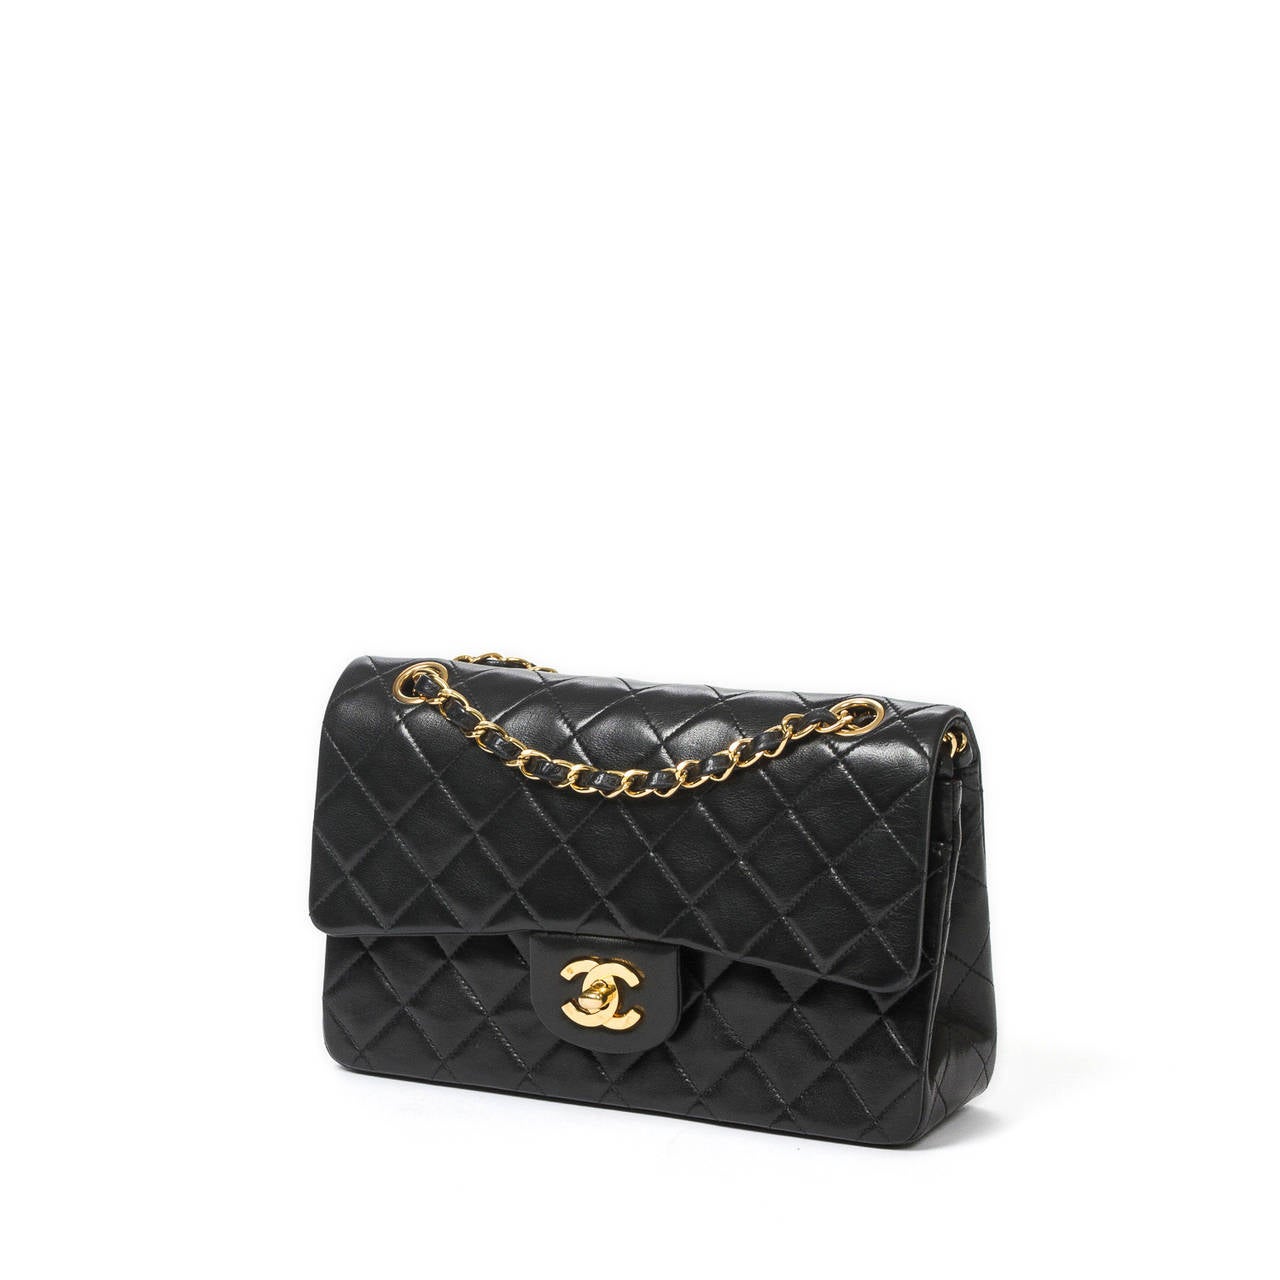 Classic double flap 23cm in black quilted leather with double chain strap interlaced with black leather, CC turnlock and gold tone hardware. Burgundy leather interior with 3 slip pockets and authenticity sticker. Box and dustbag included. Few scuffs